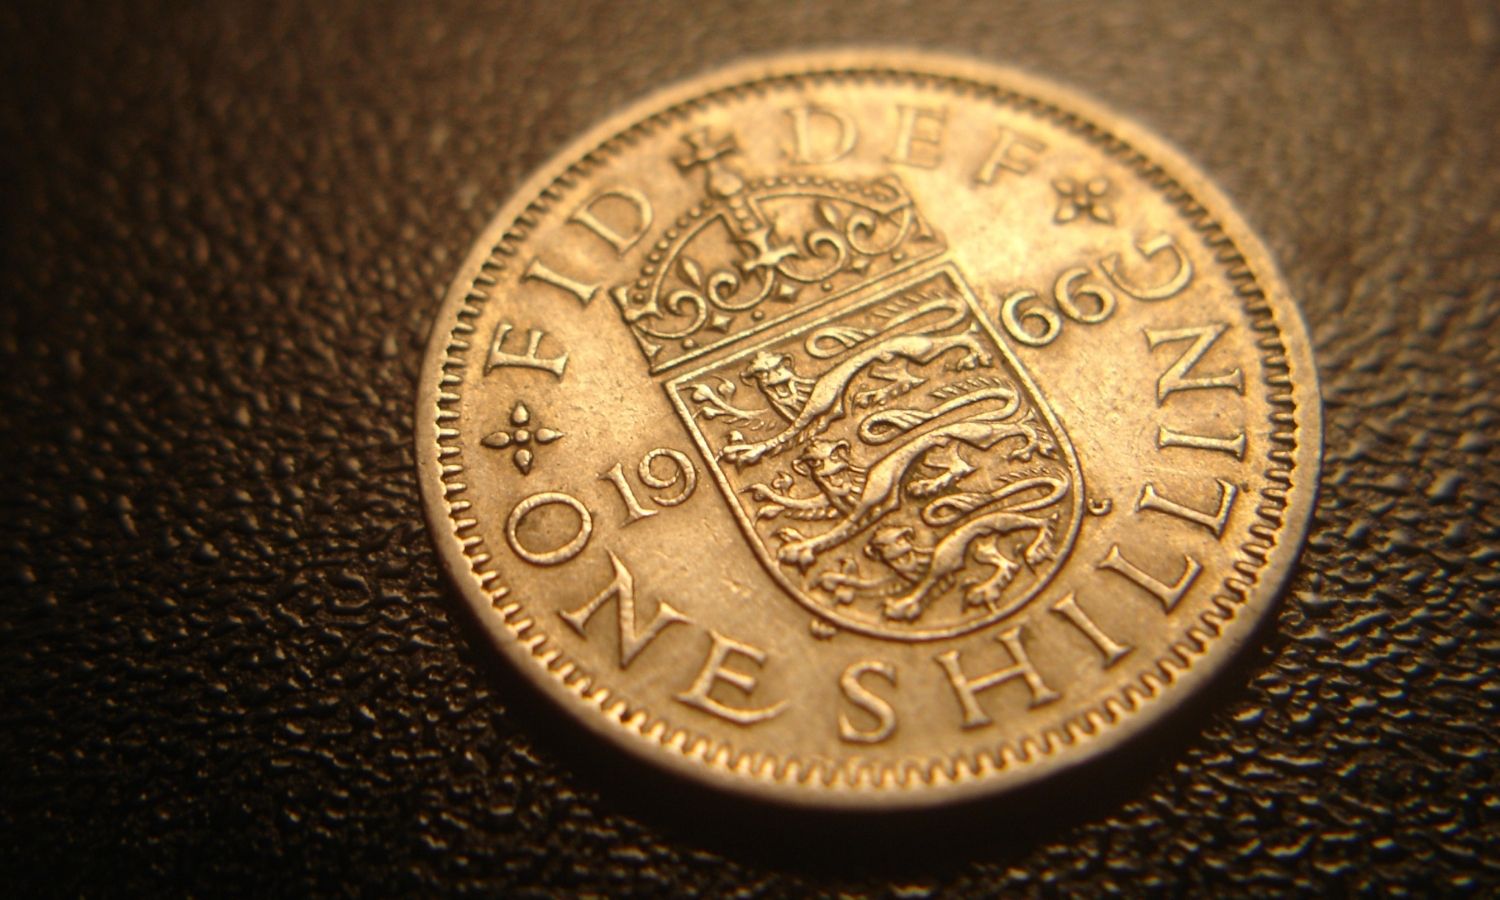 OTD in 1971: Great Britain ditched their Pence and Shillings currency values for decimal varieties.